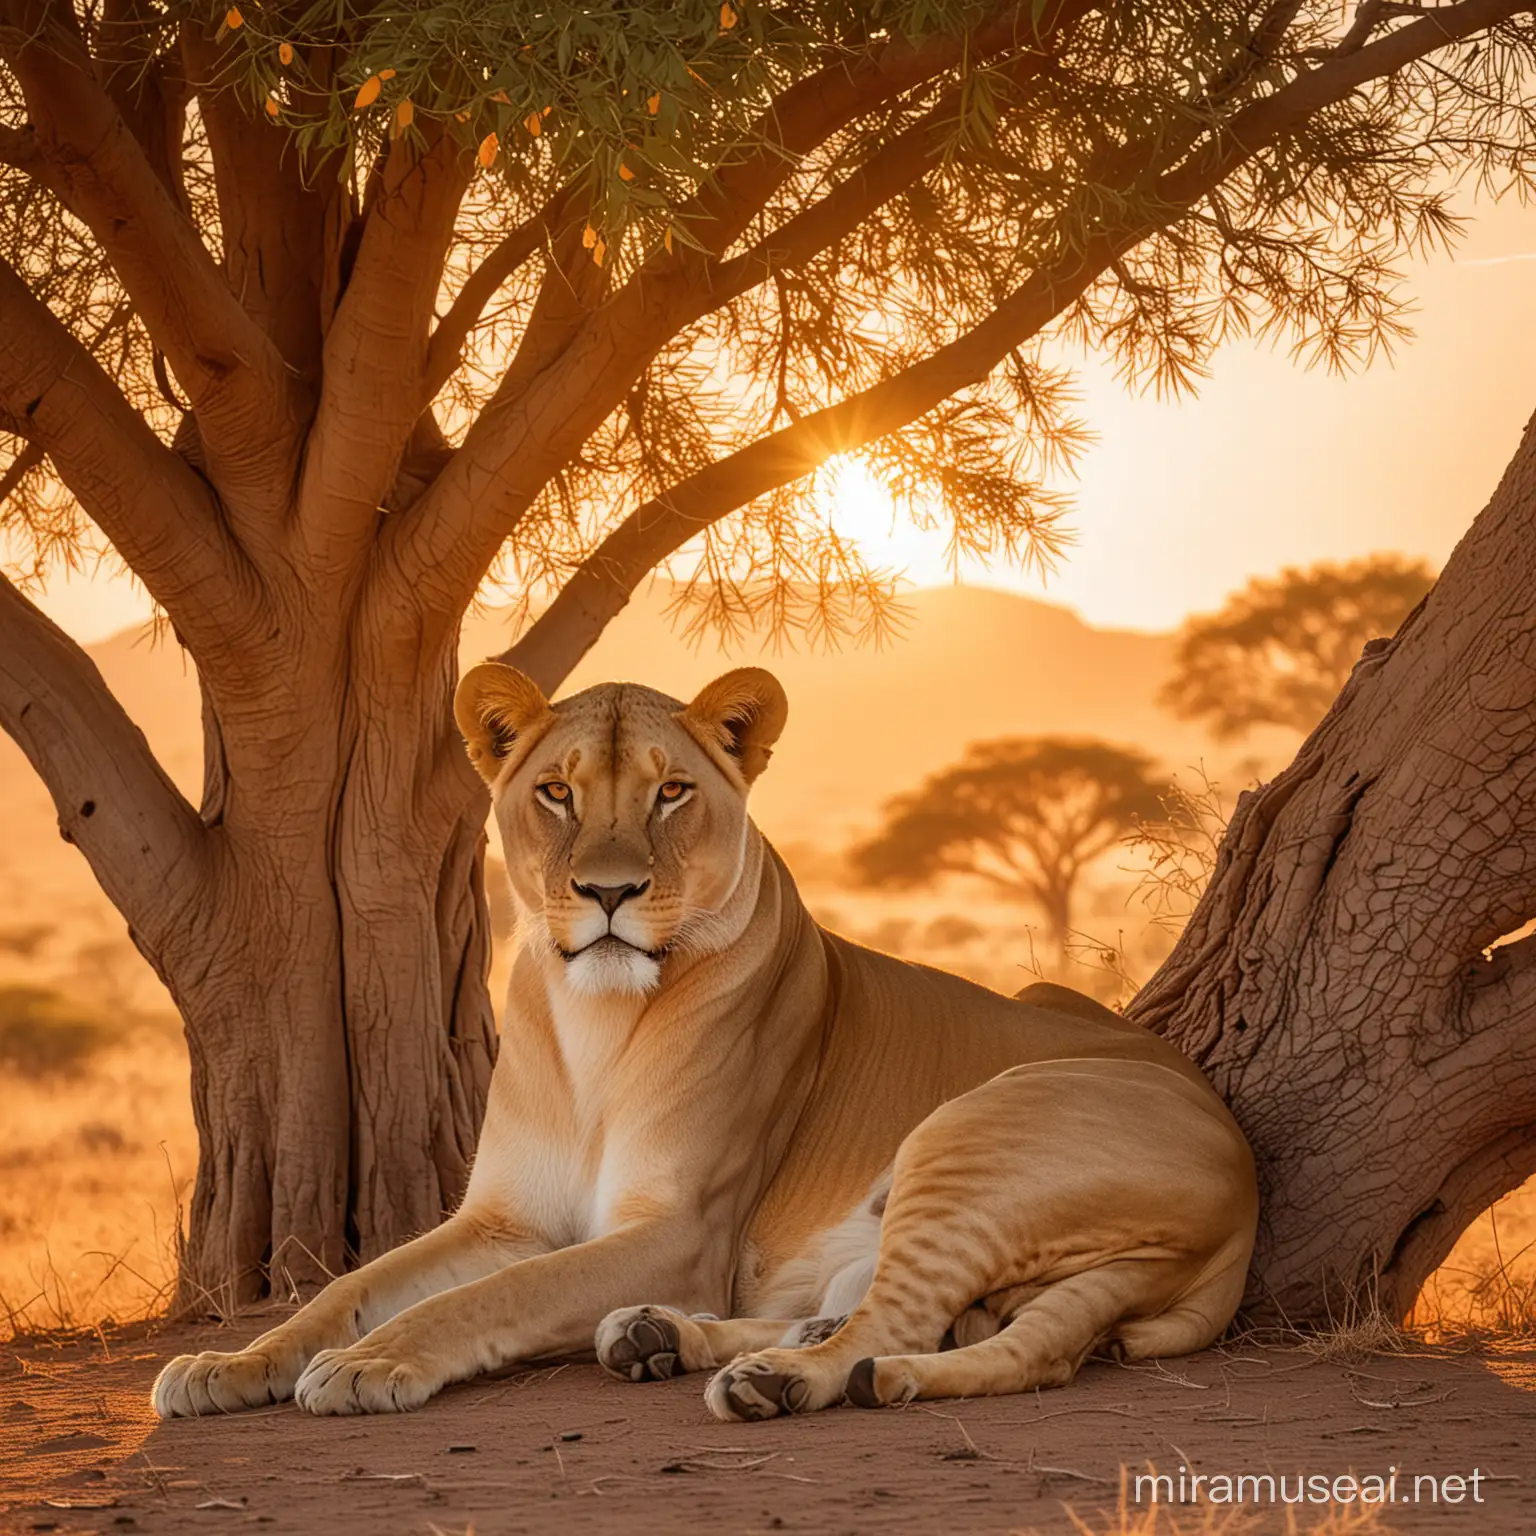 Lioness at Rest Under Acacia Tree at Sunset with Warm Orange Tones